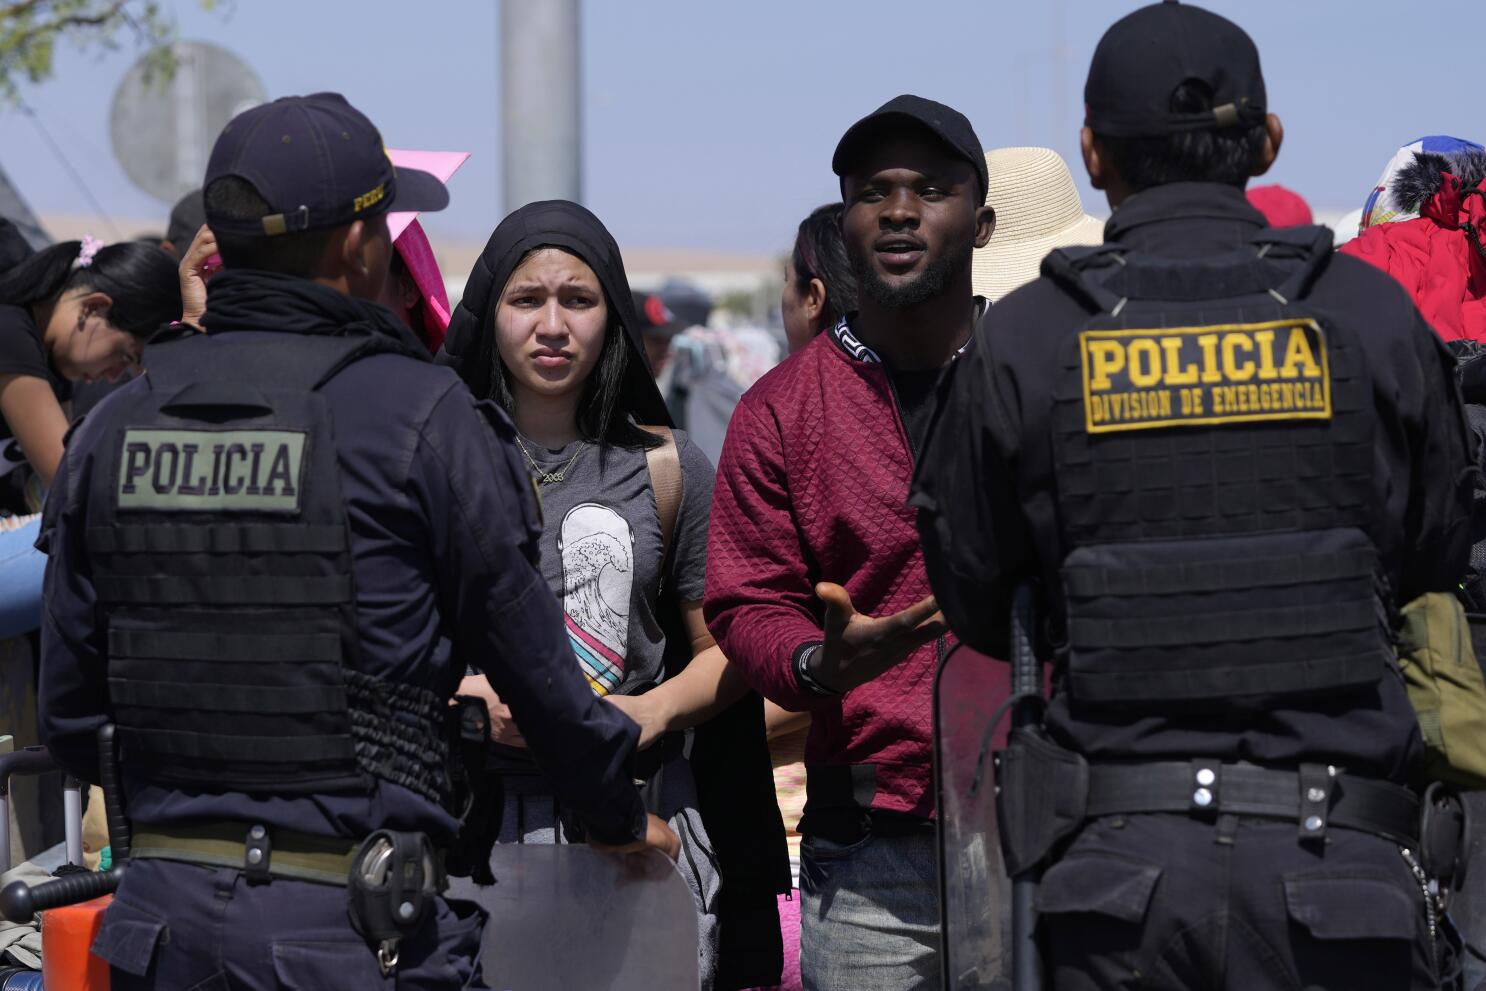 Border Patrol sending migrants to unofficial camps in California's